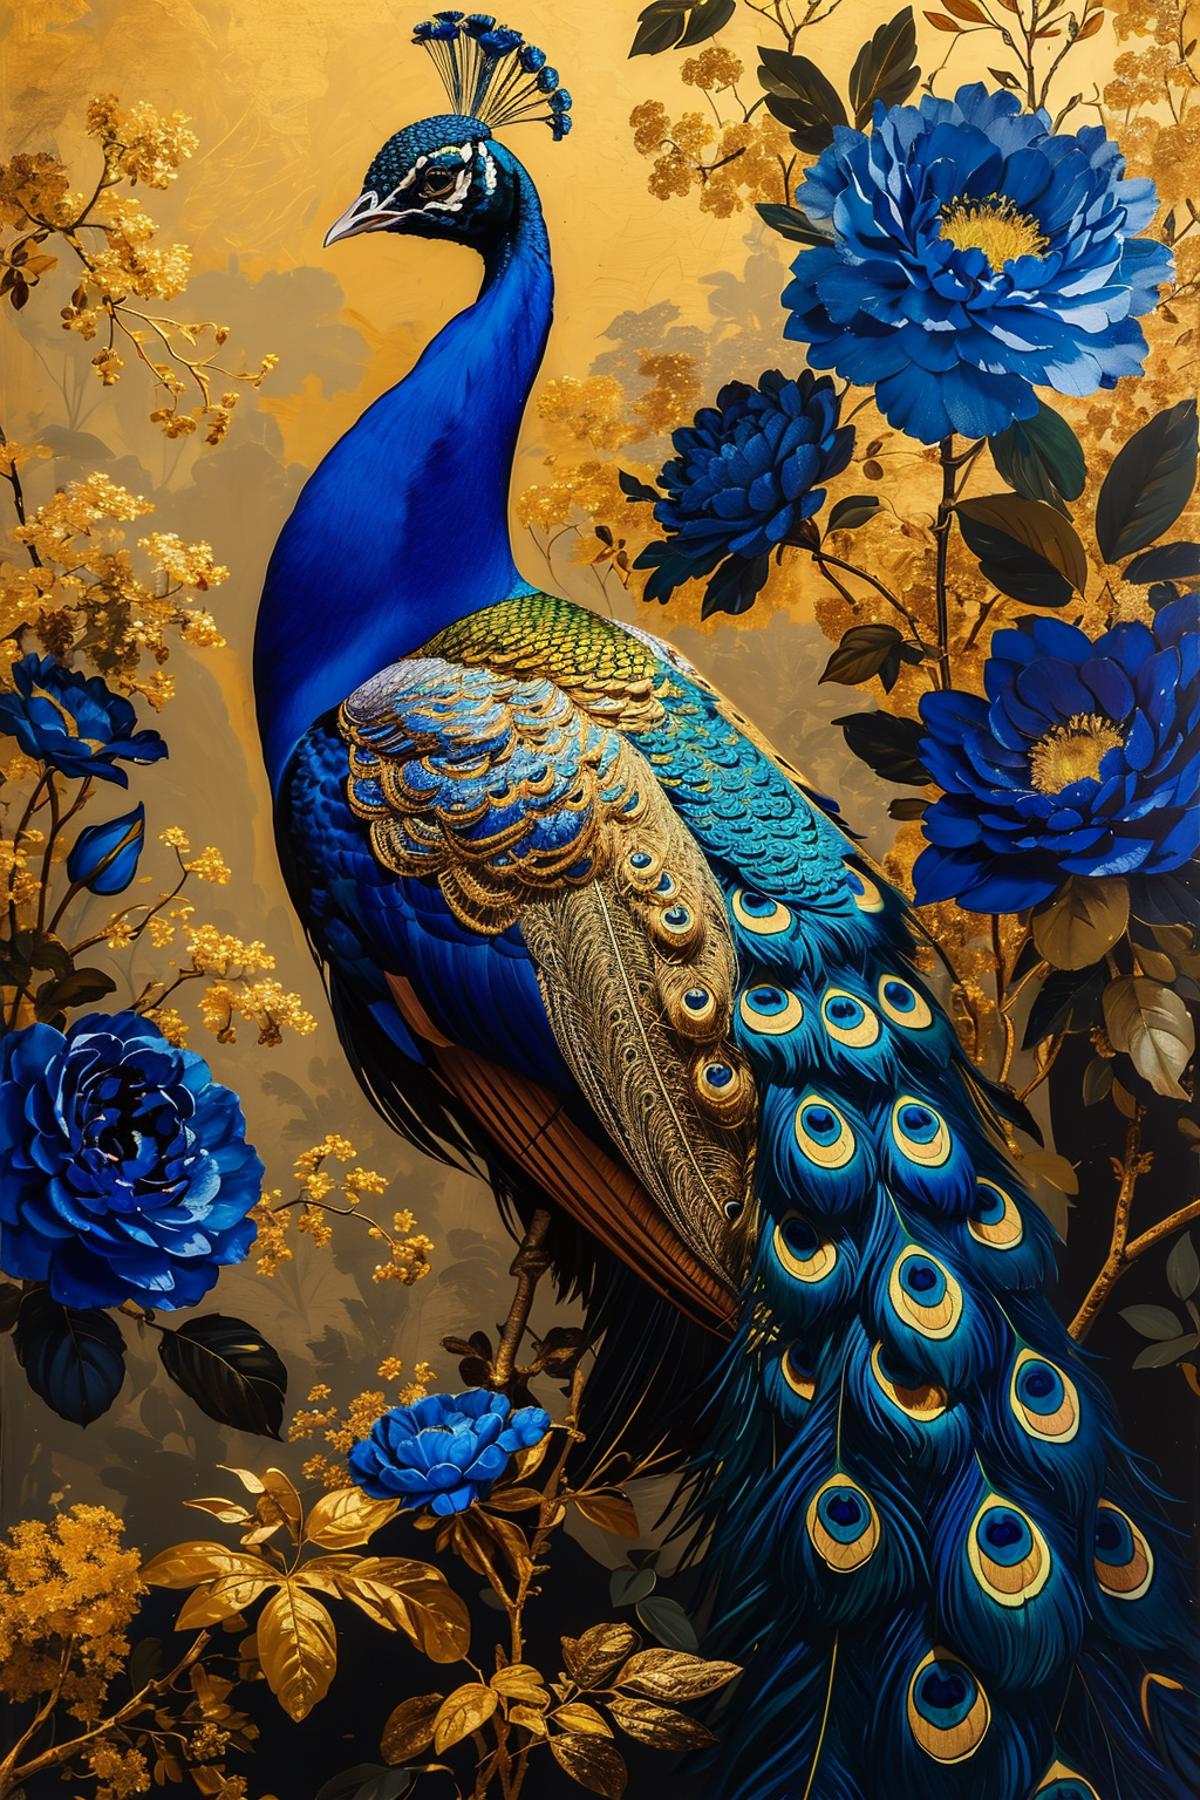 A Peacock with a Blue and Gold Body and Blue Feathers Sitting on a Branch with Blue Flowers.